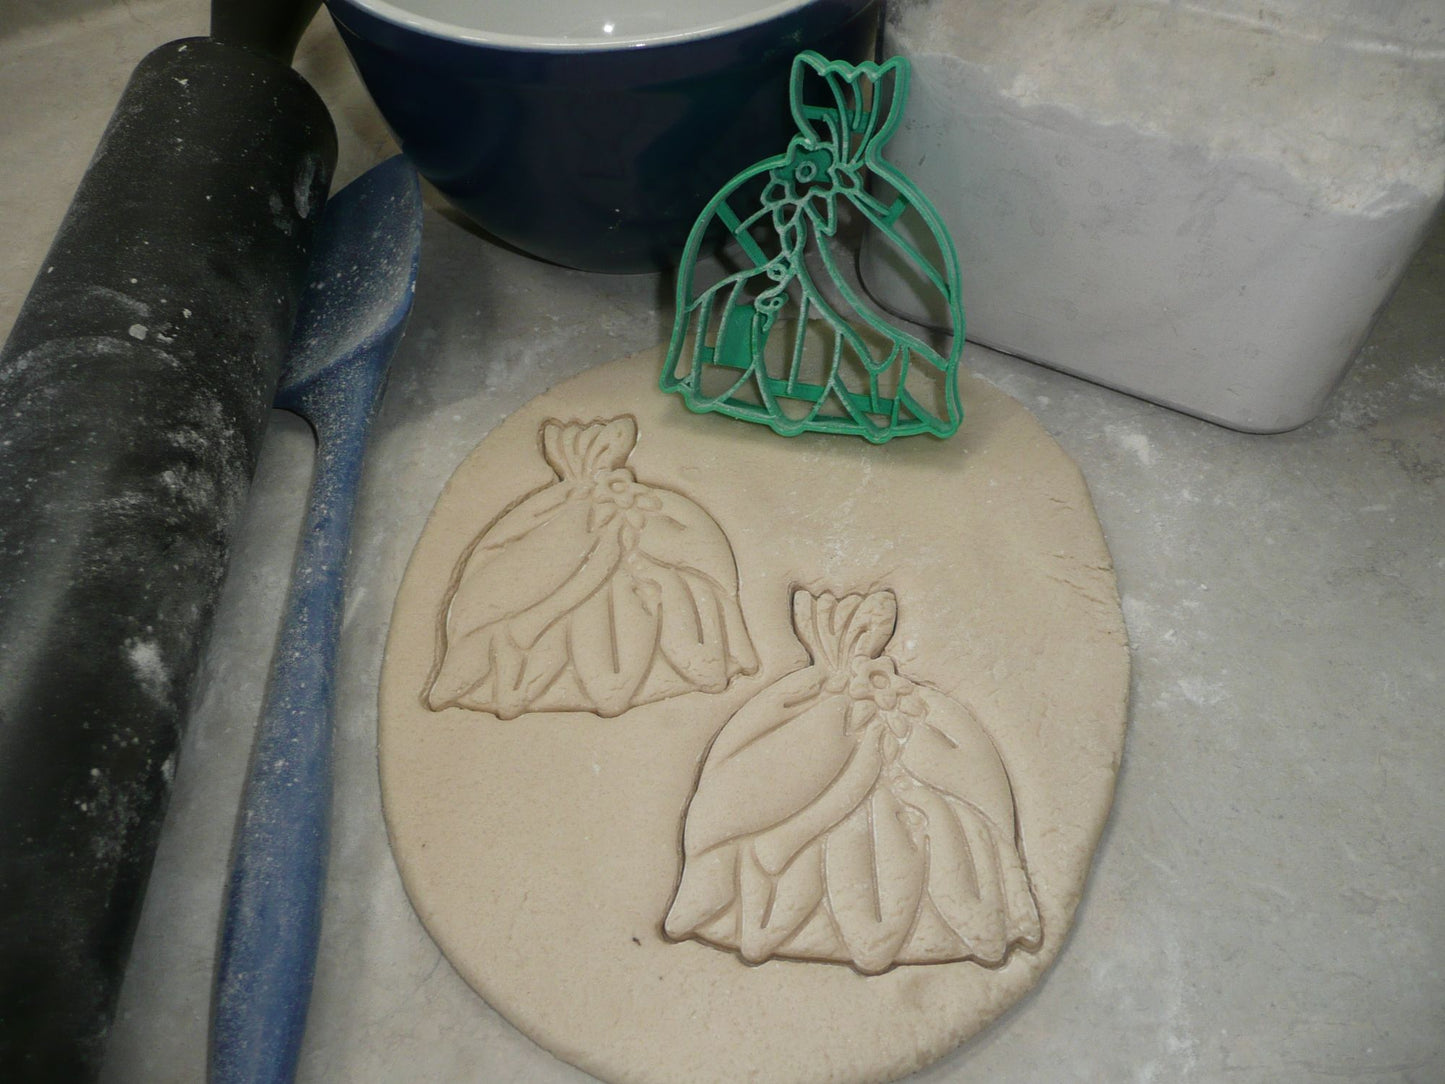 Princess Tiana Dress Movie Character Cookie Cutter Made in USA PR4414